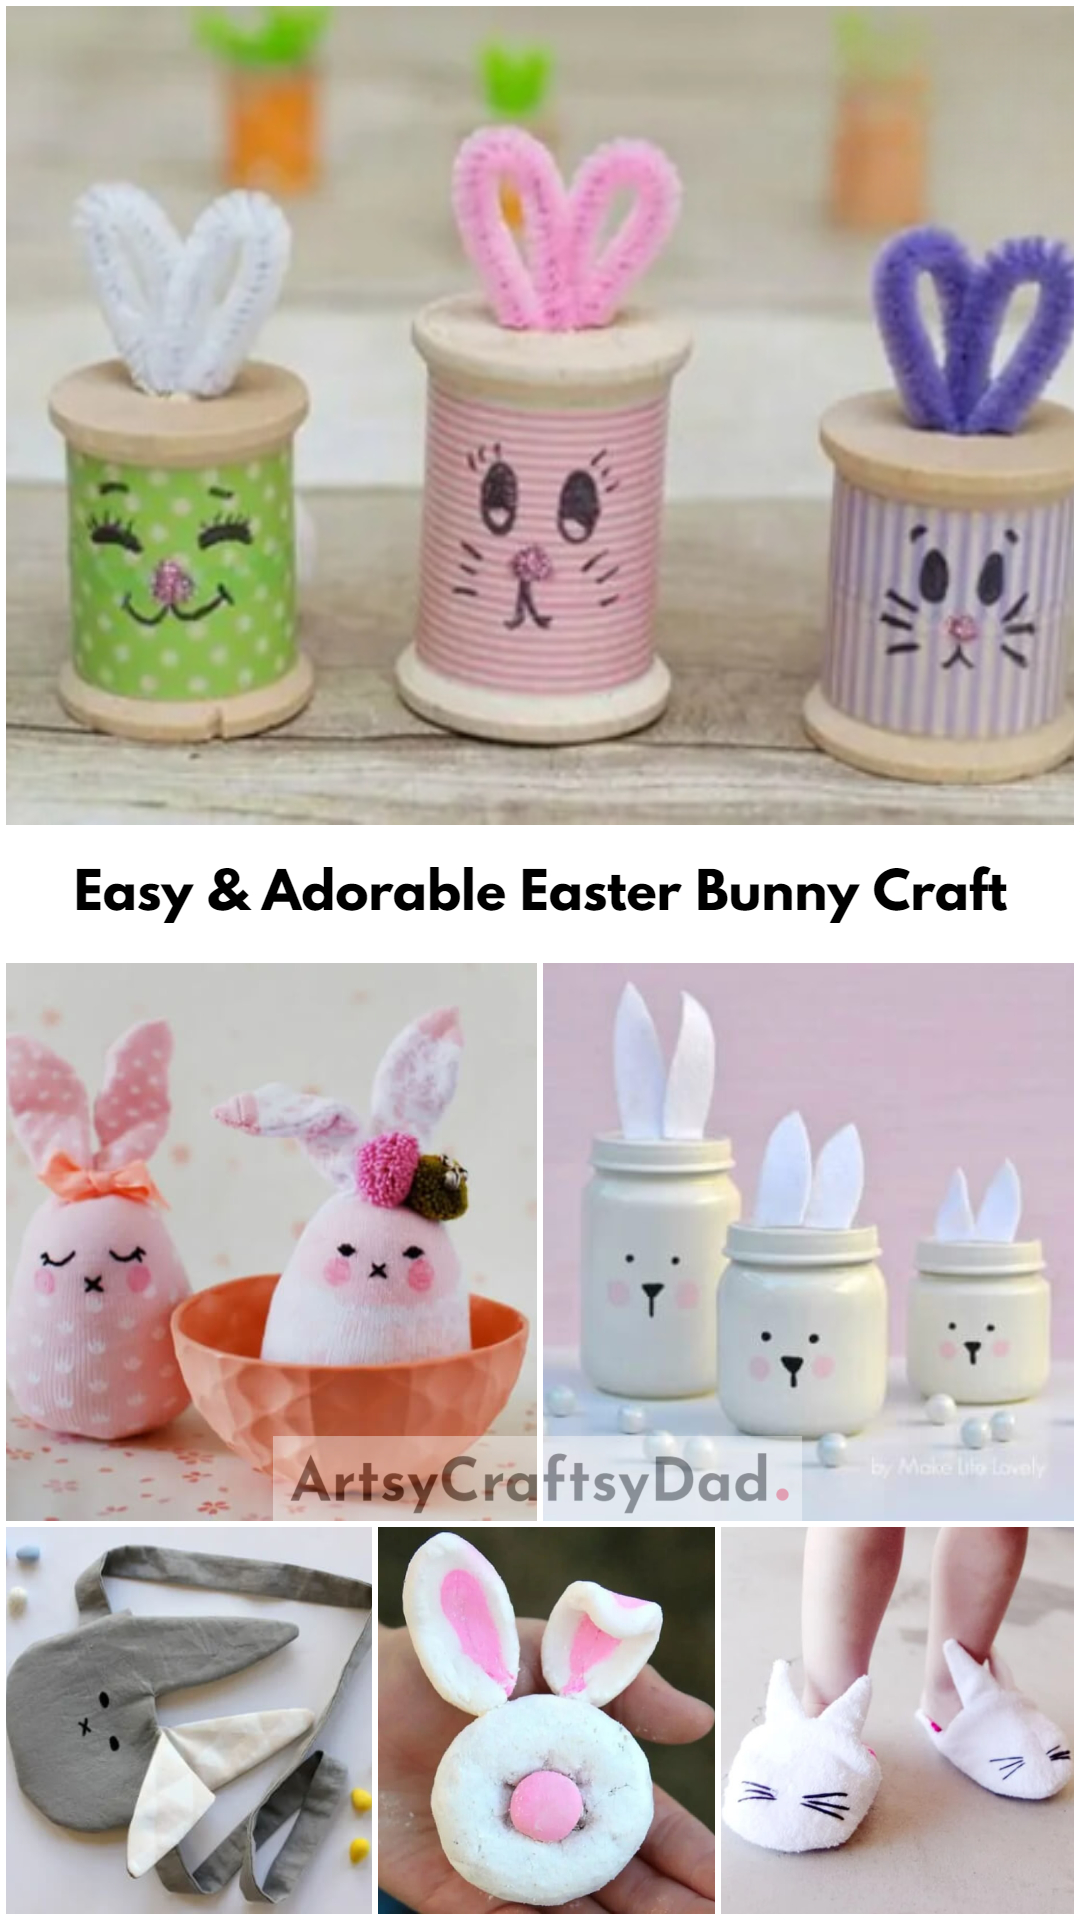 Easy & Adorable Easter Bunny Craft For Kids